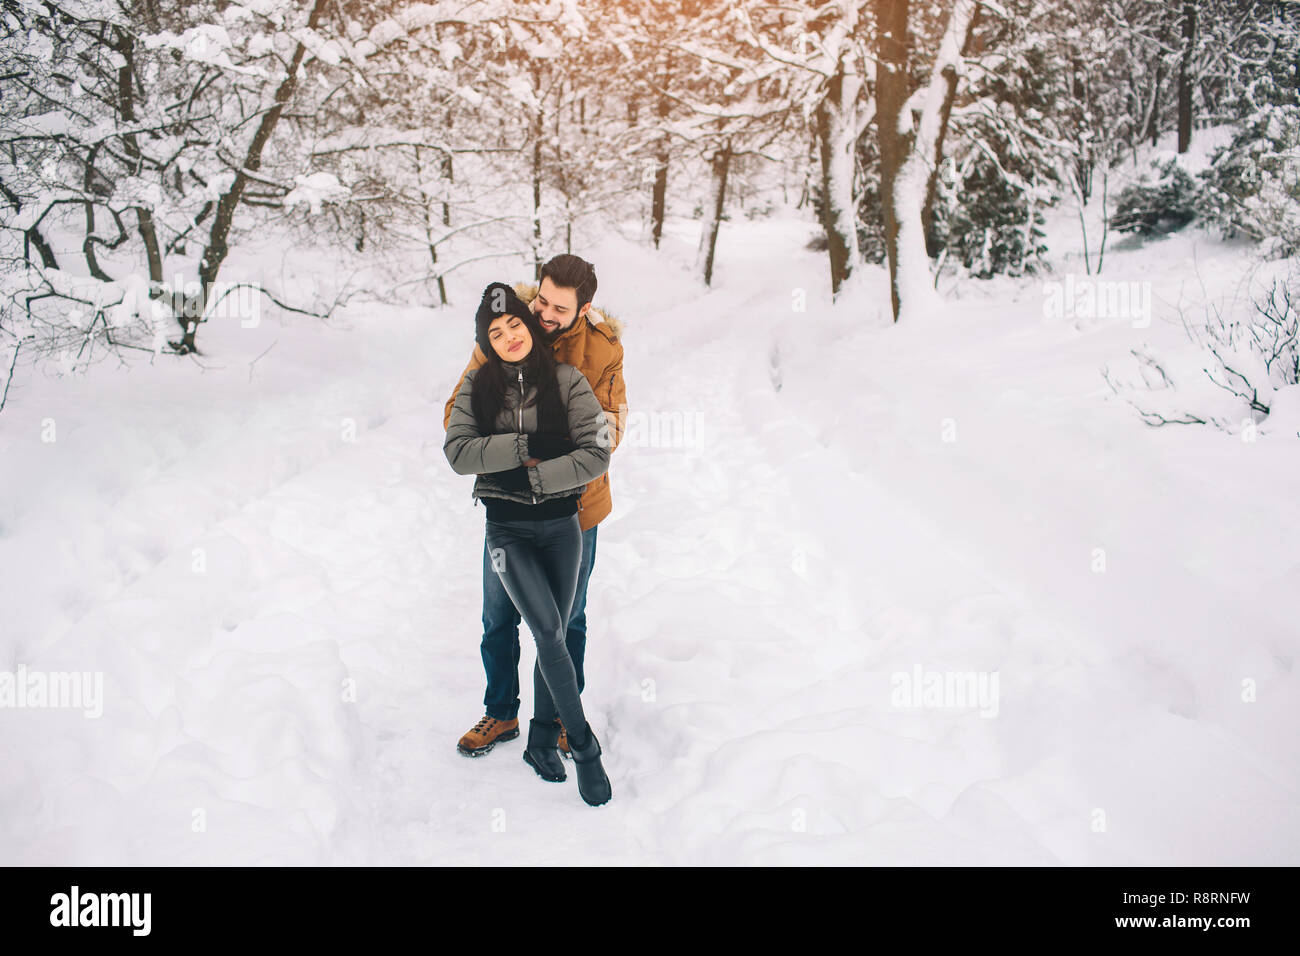 21 Exciting Winter Photography Tips and Ideas to Try